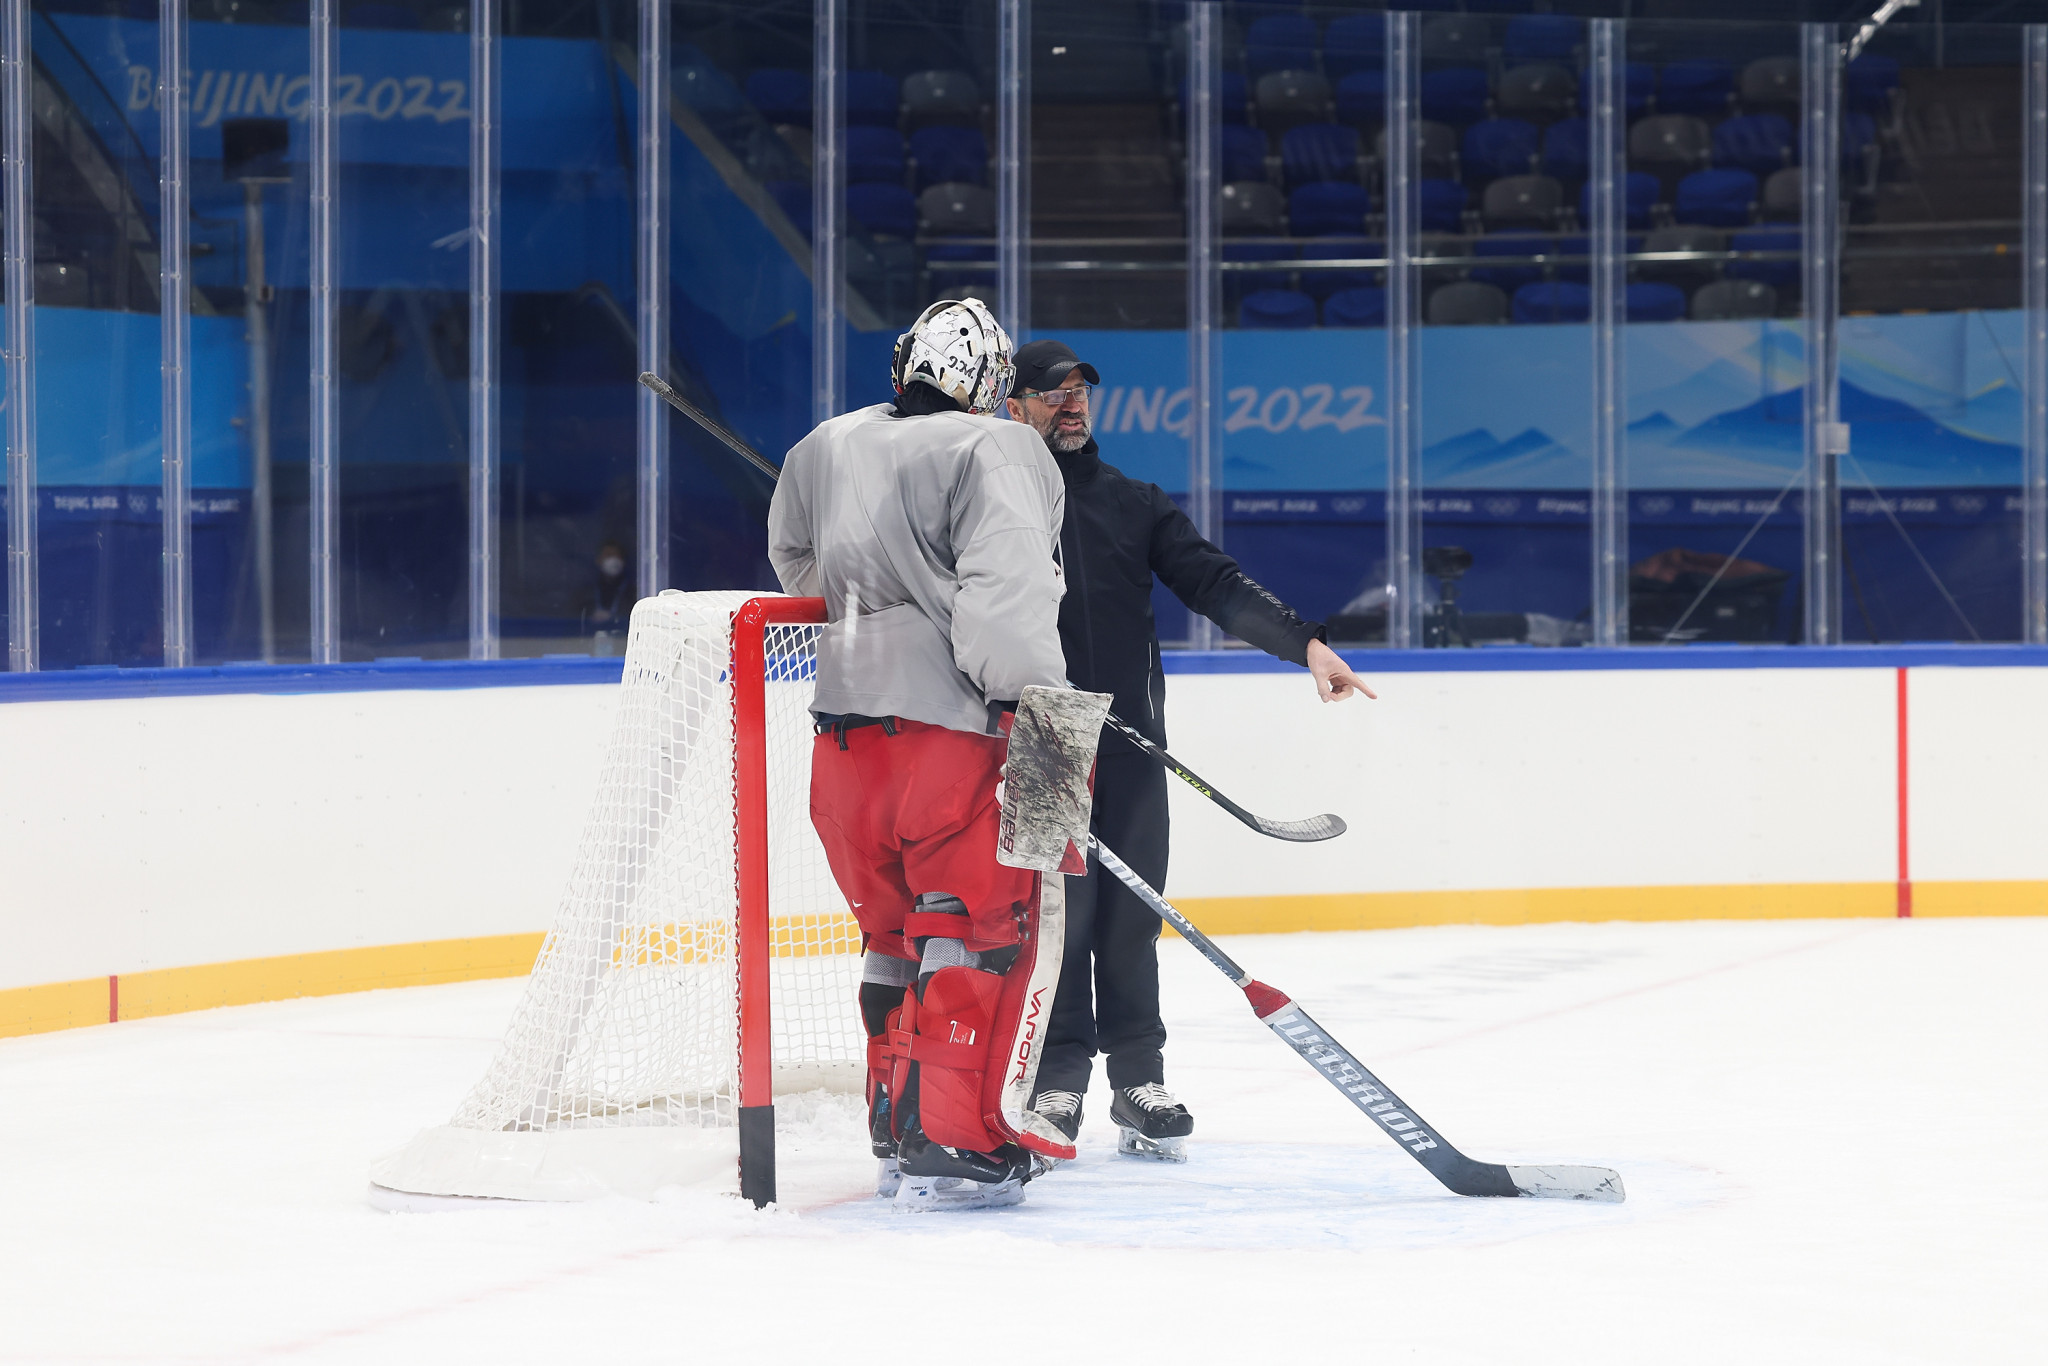 China names men's hockey team of mostly foreign-born players